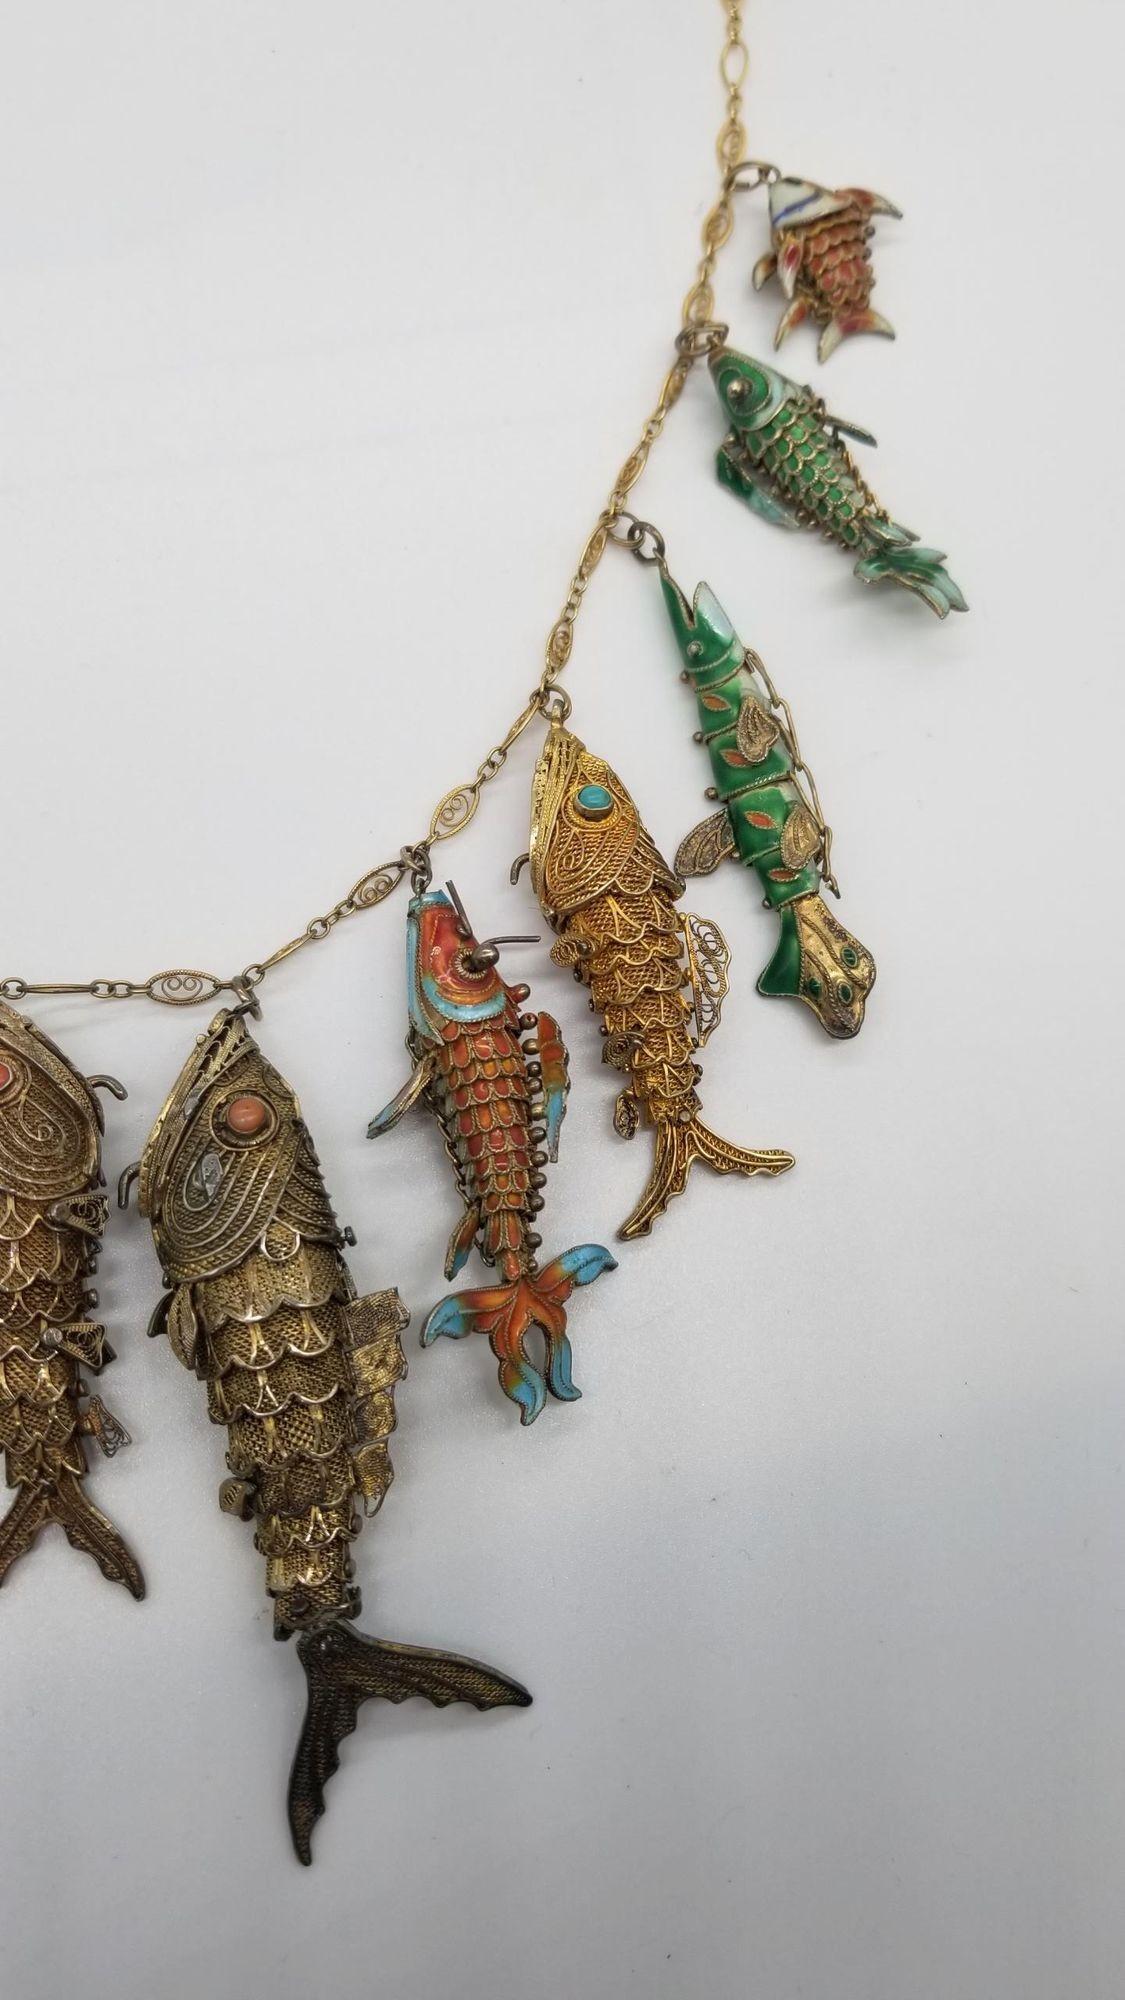 Vintage Chinese Export Koi Fish Necklace from the 1920s-1940 For Sale 1